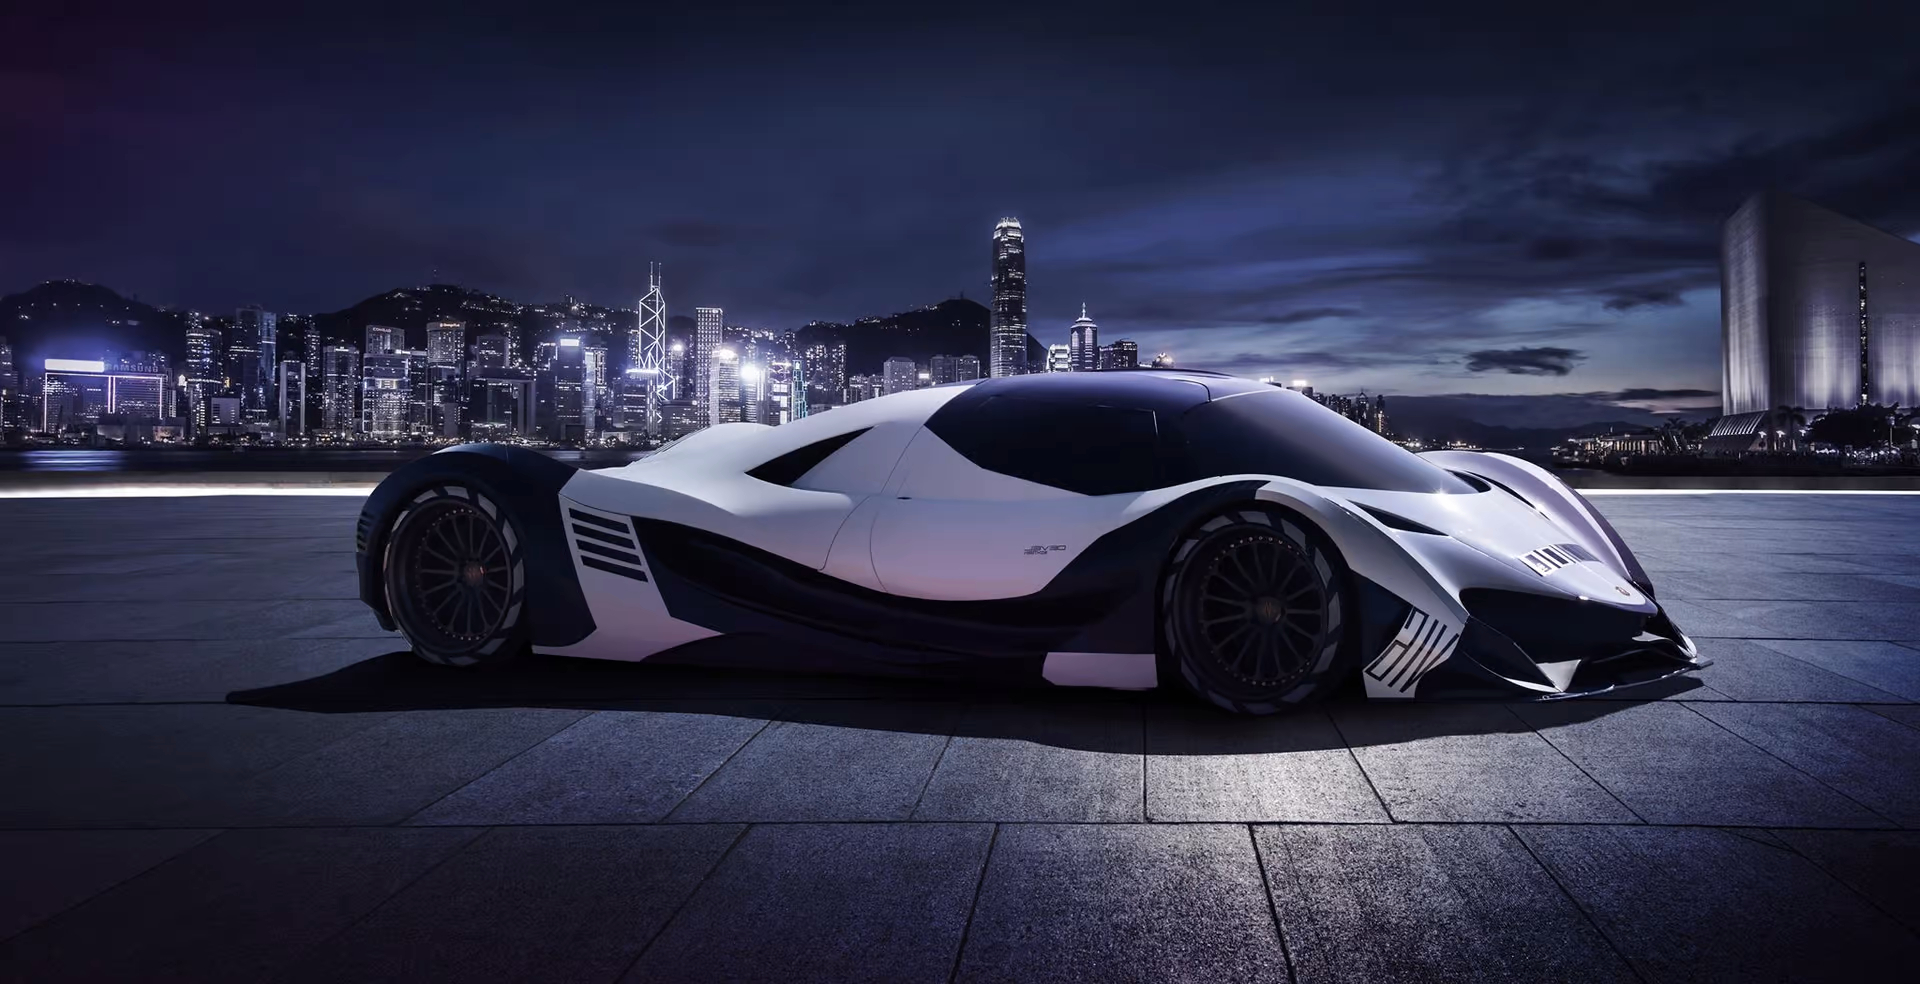 Extreme design profile of the Devel Sixteen